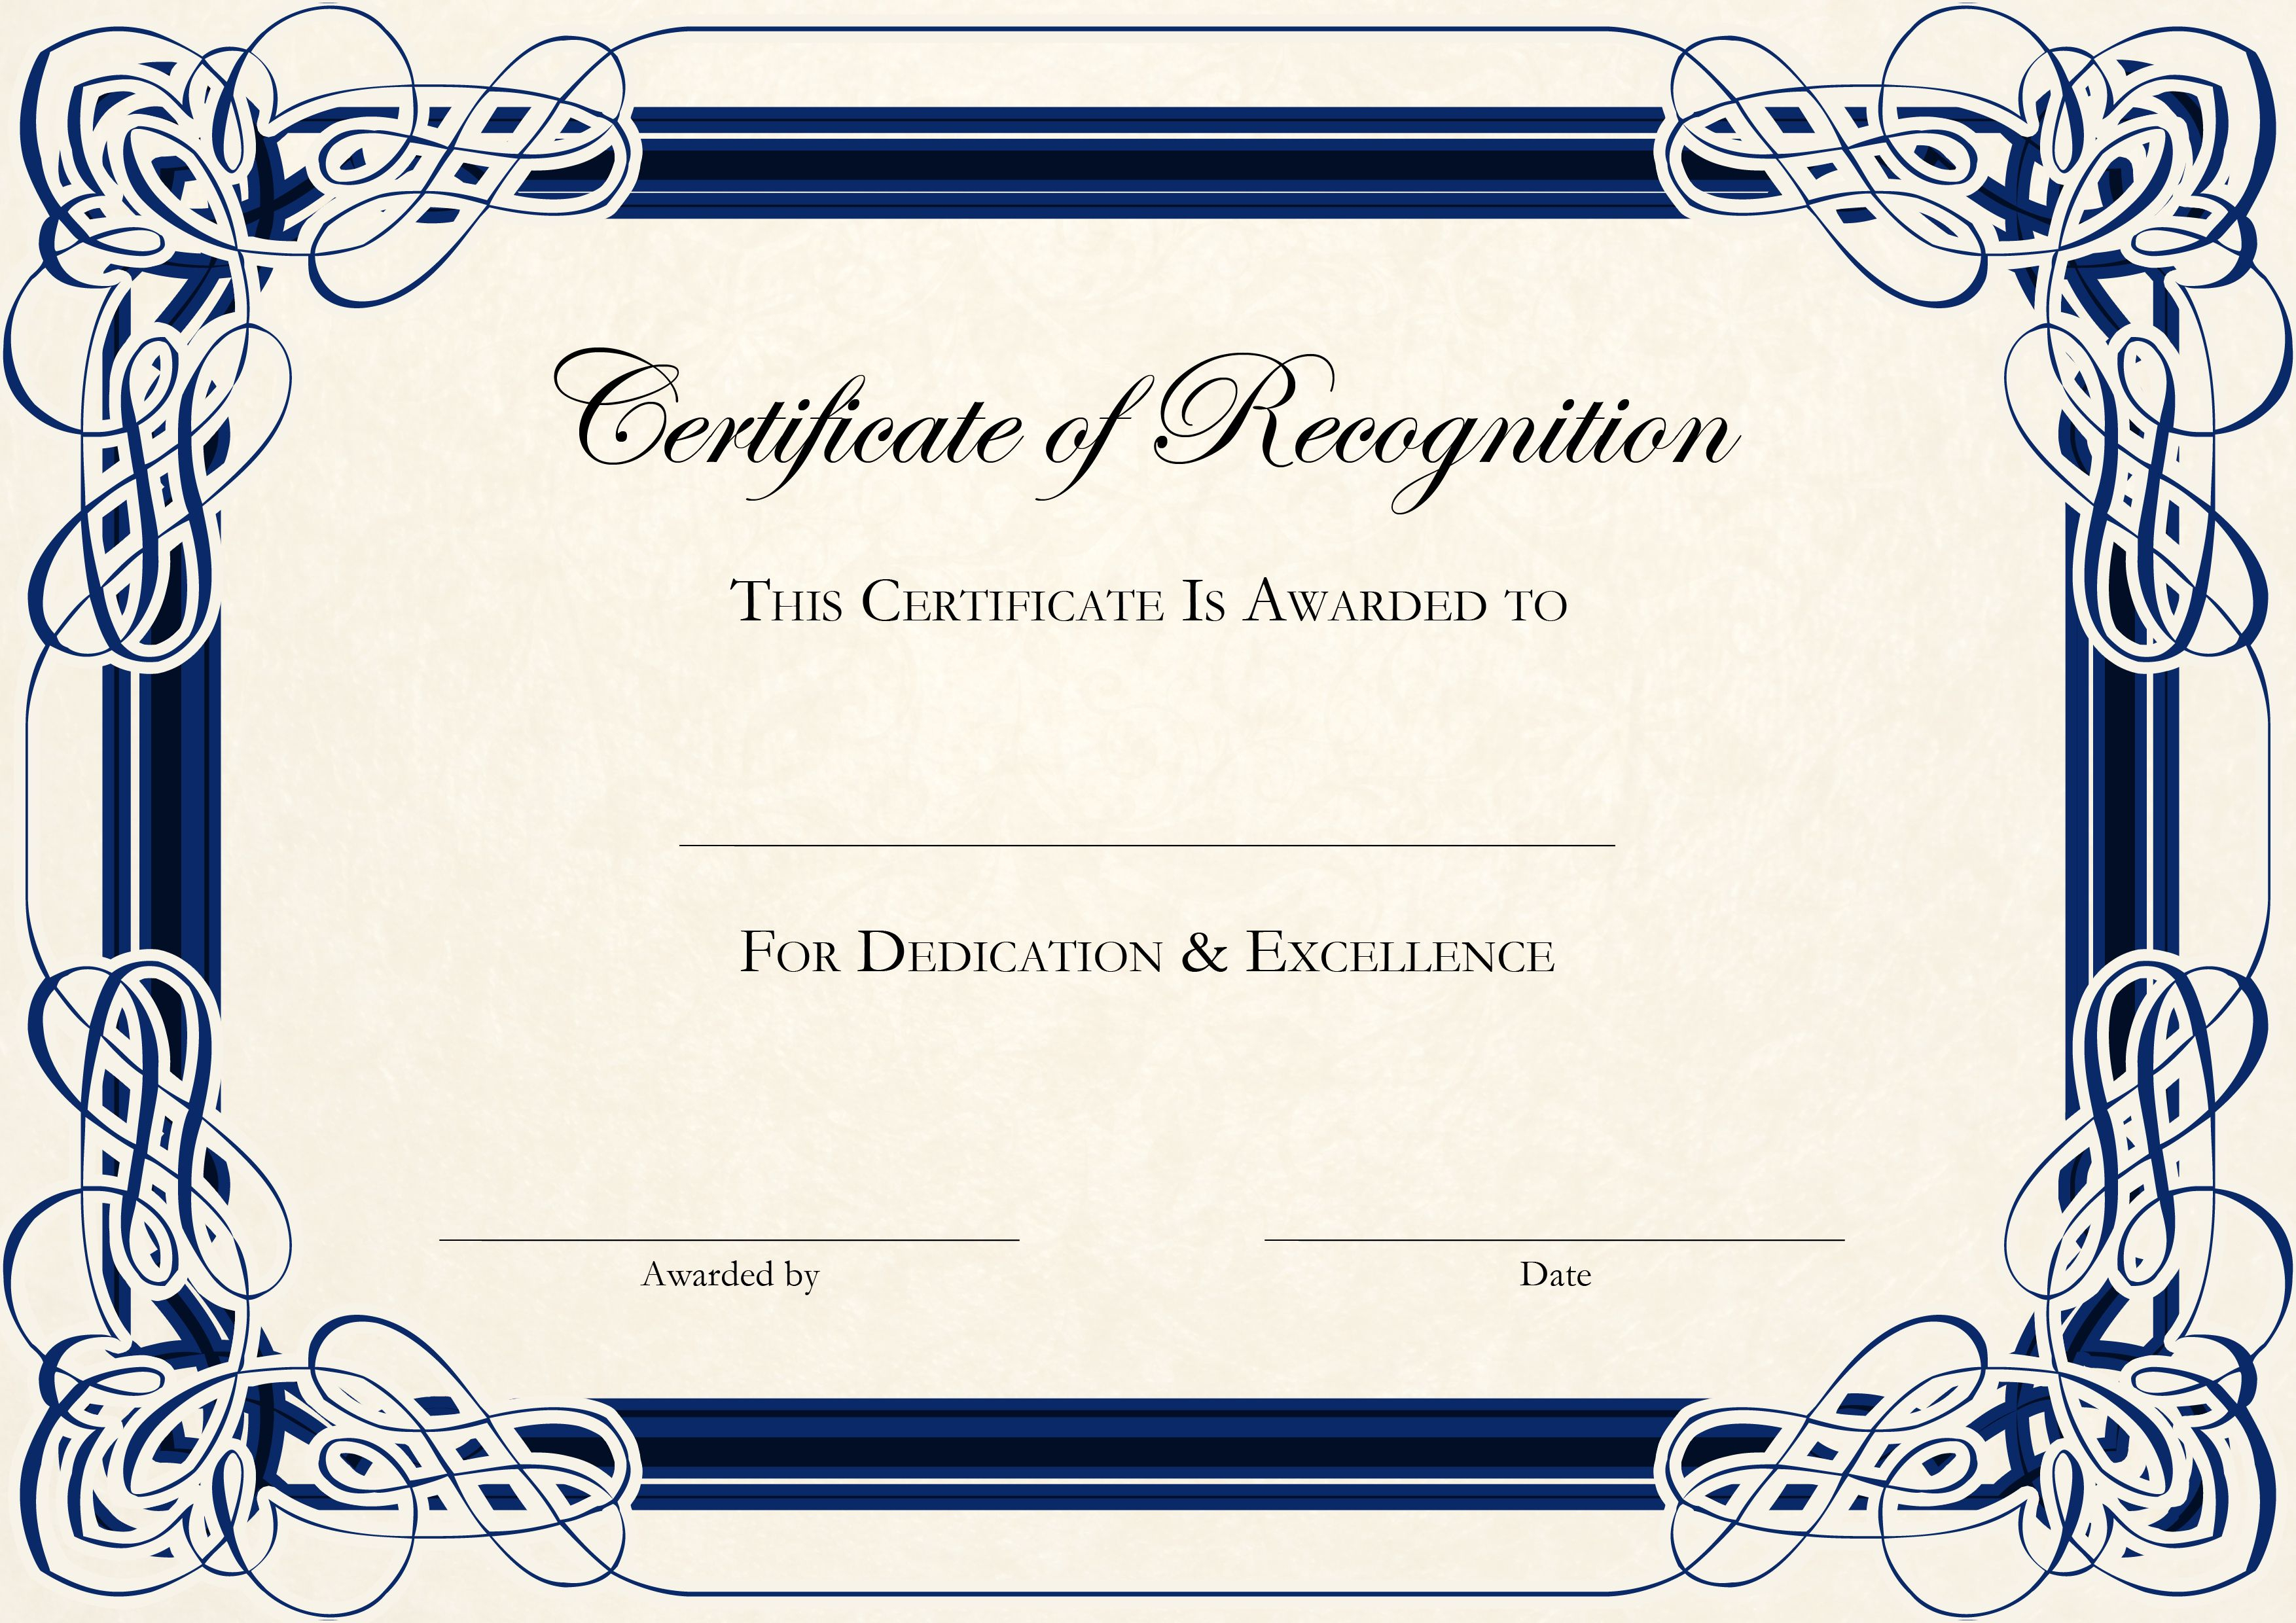 Sports Cetificate | Certificate Of Recognition A4 Thumbnail Throughout Sports Award Certificate Template Word